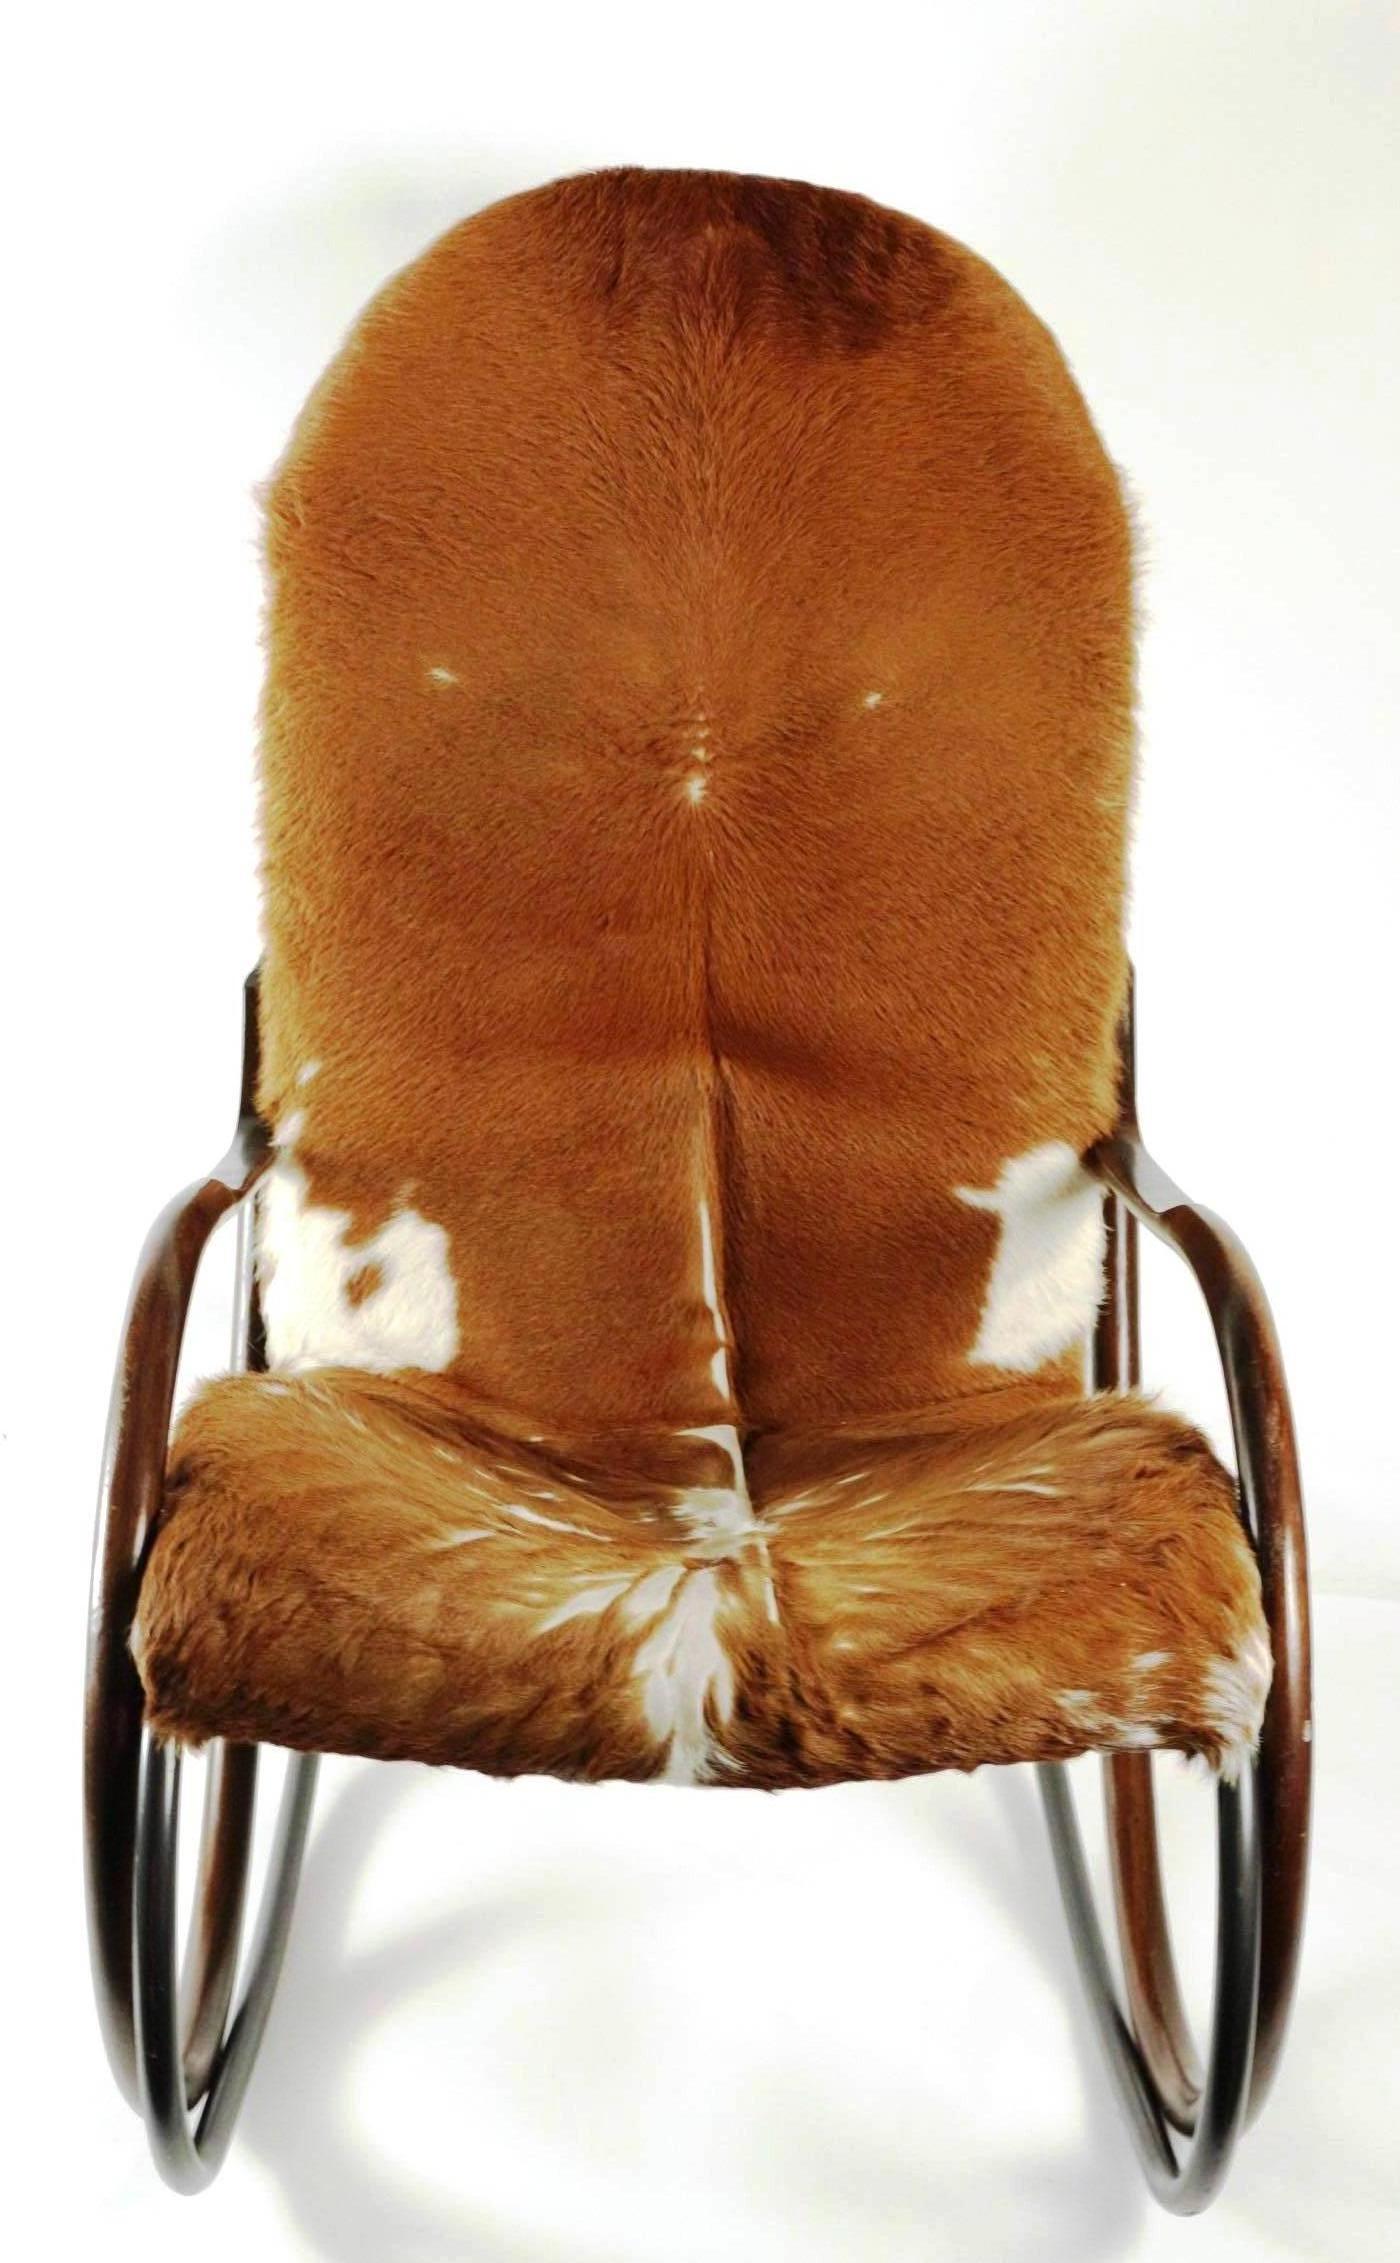 Cowhide Rare and Original Nonna Rocking Chair, Paul Tuttle for Strassle, 1972 Cow Skin